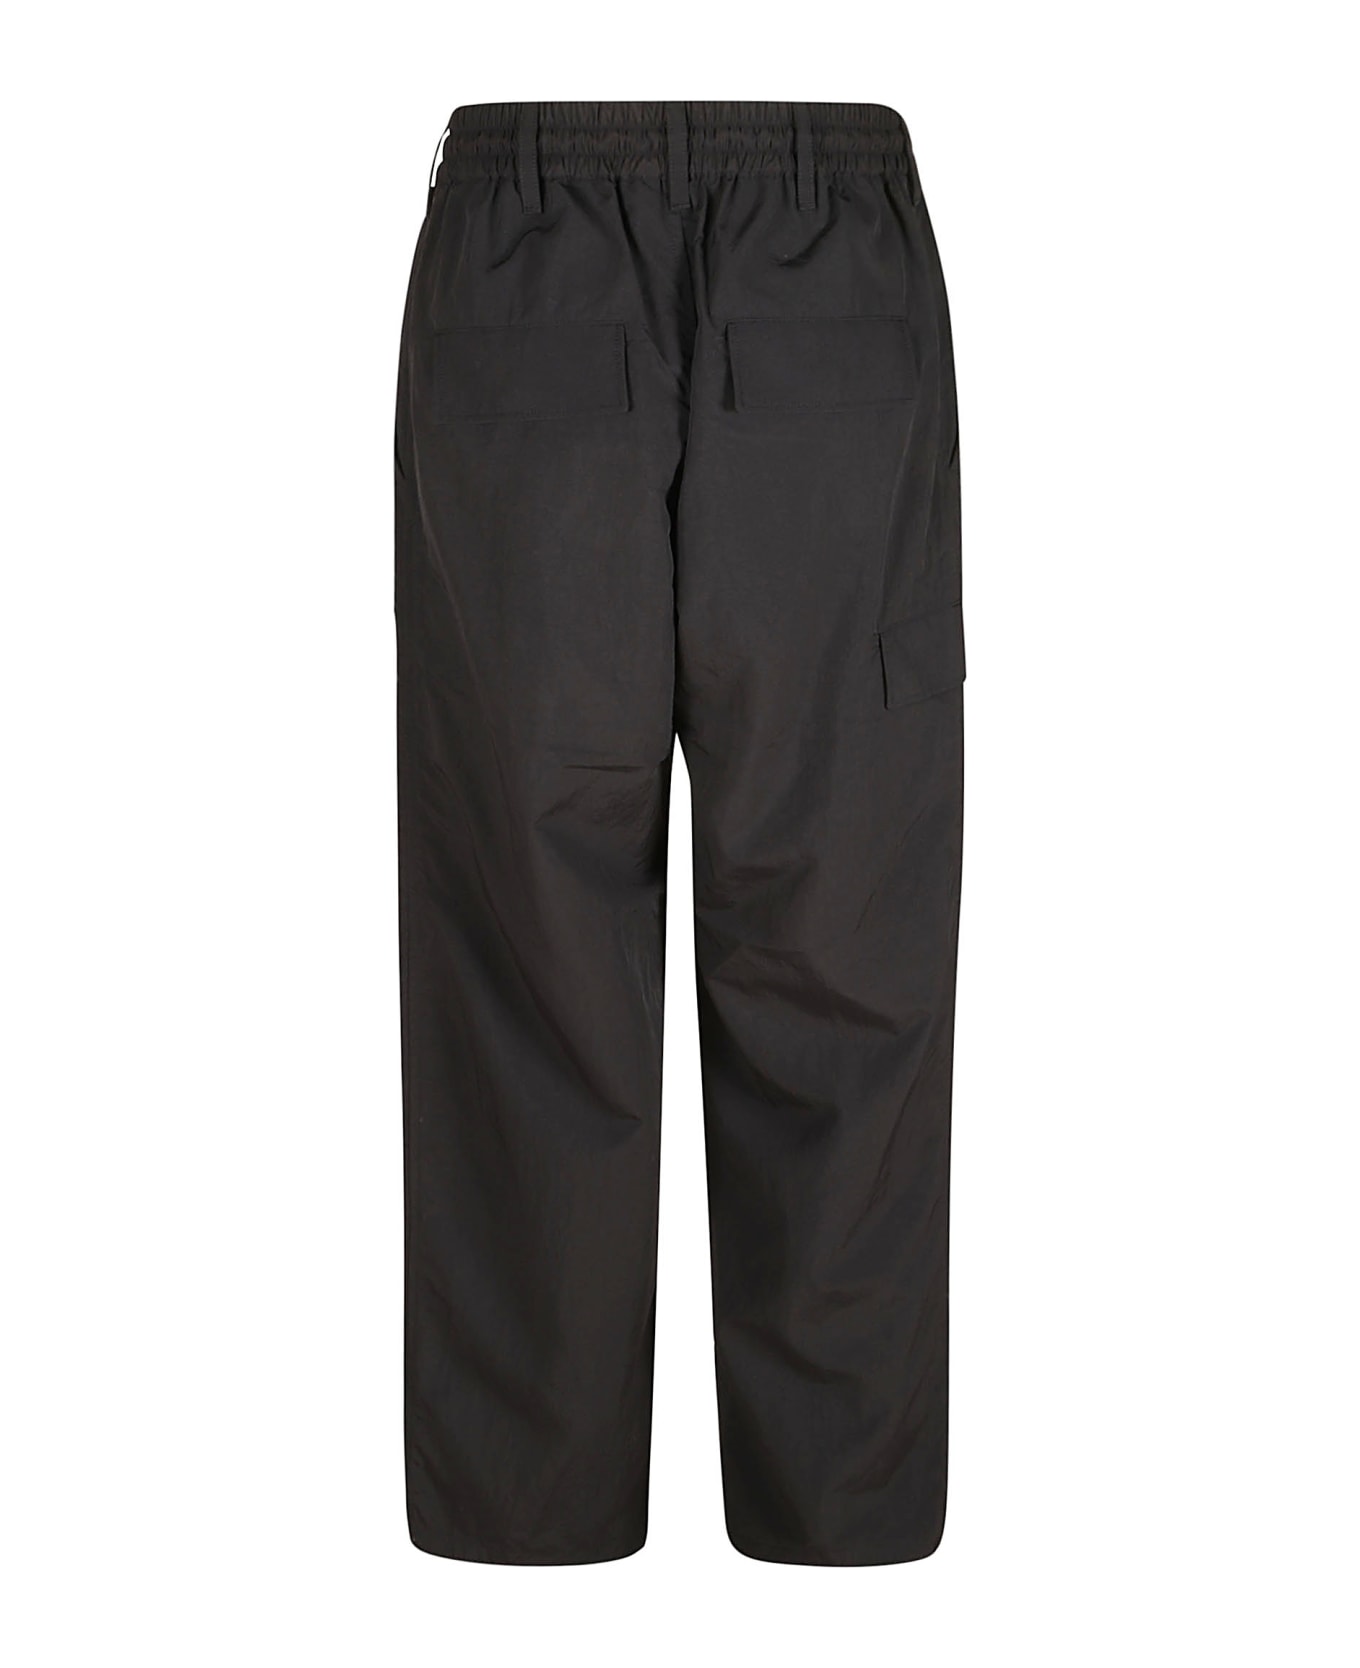 Y-3 Buttoned Cargo Trousers - Black name:467